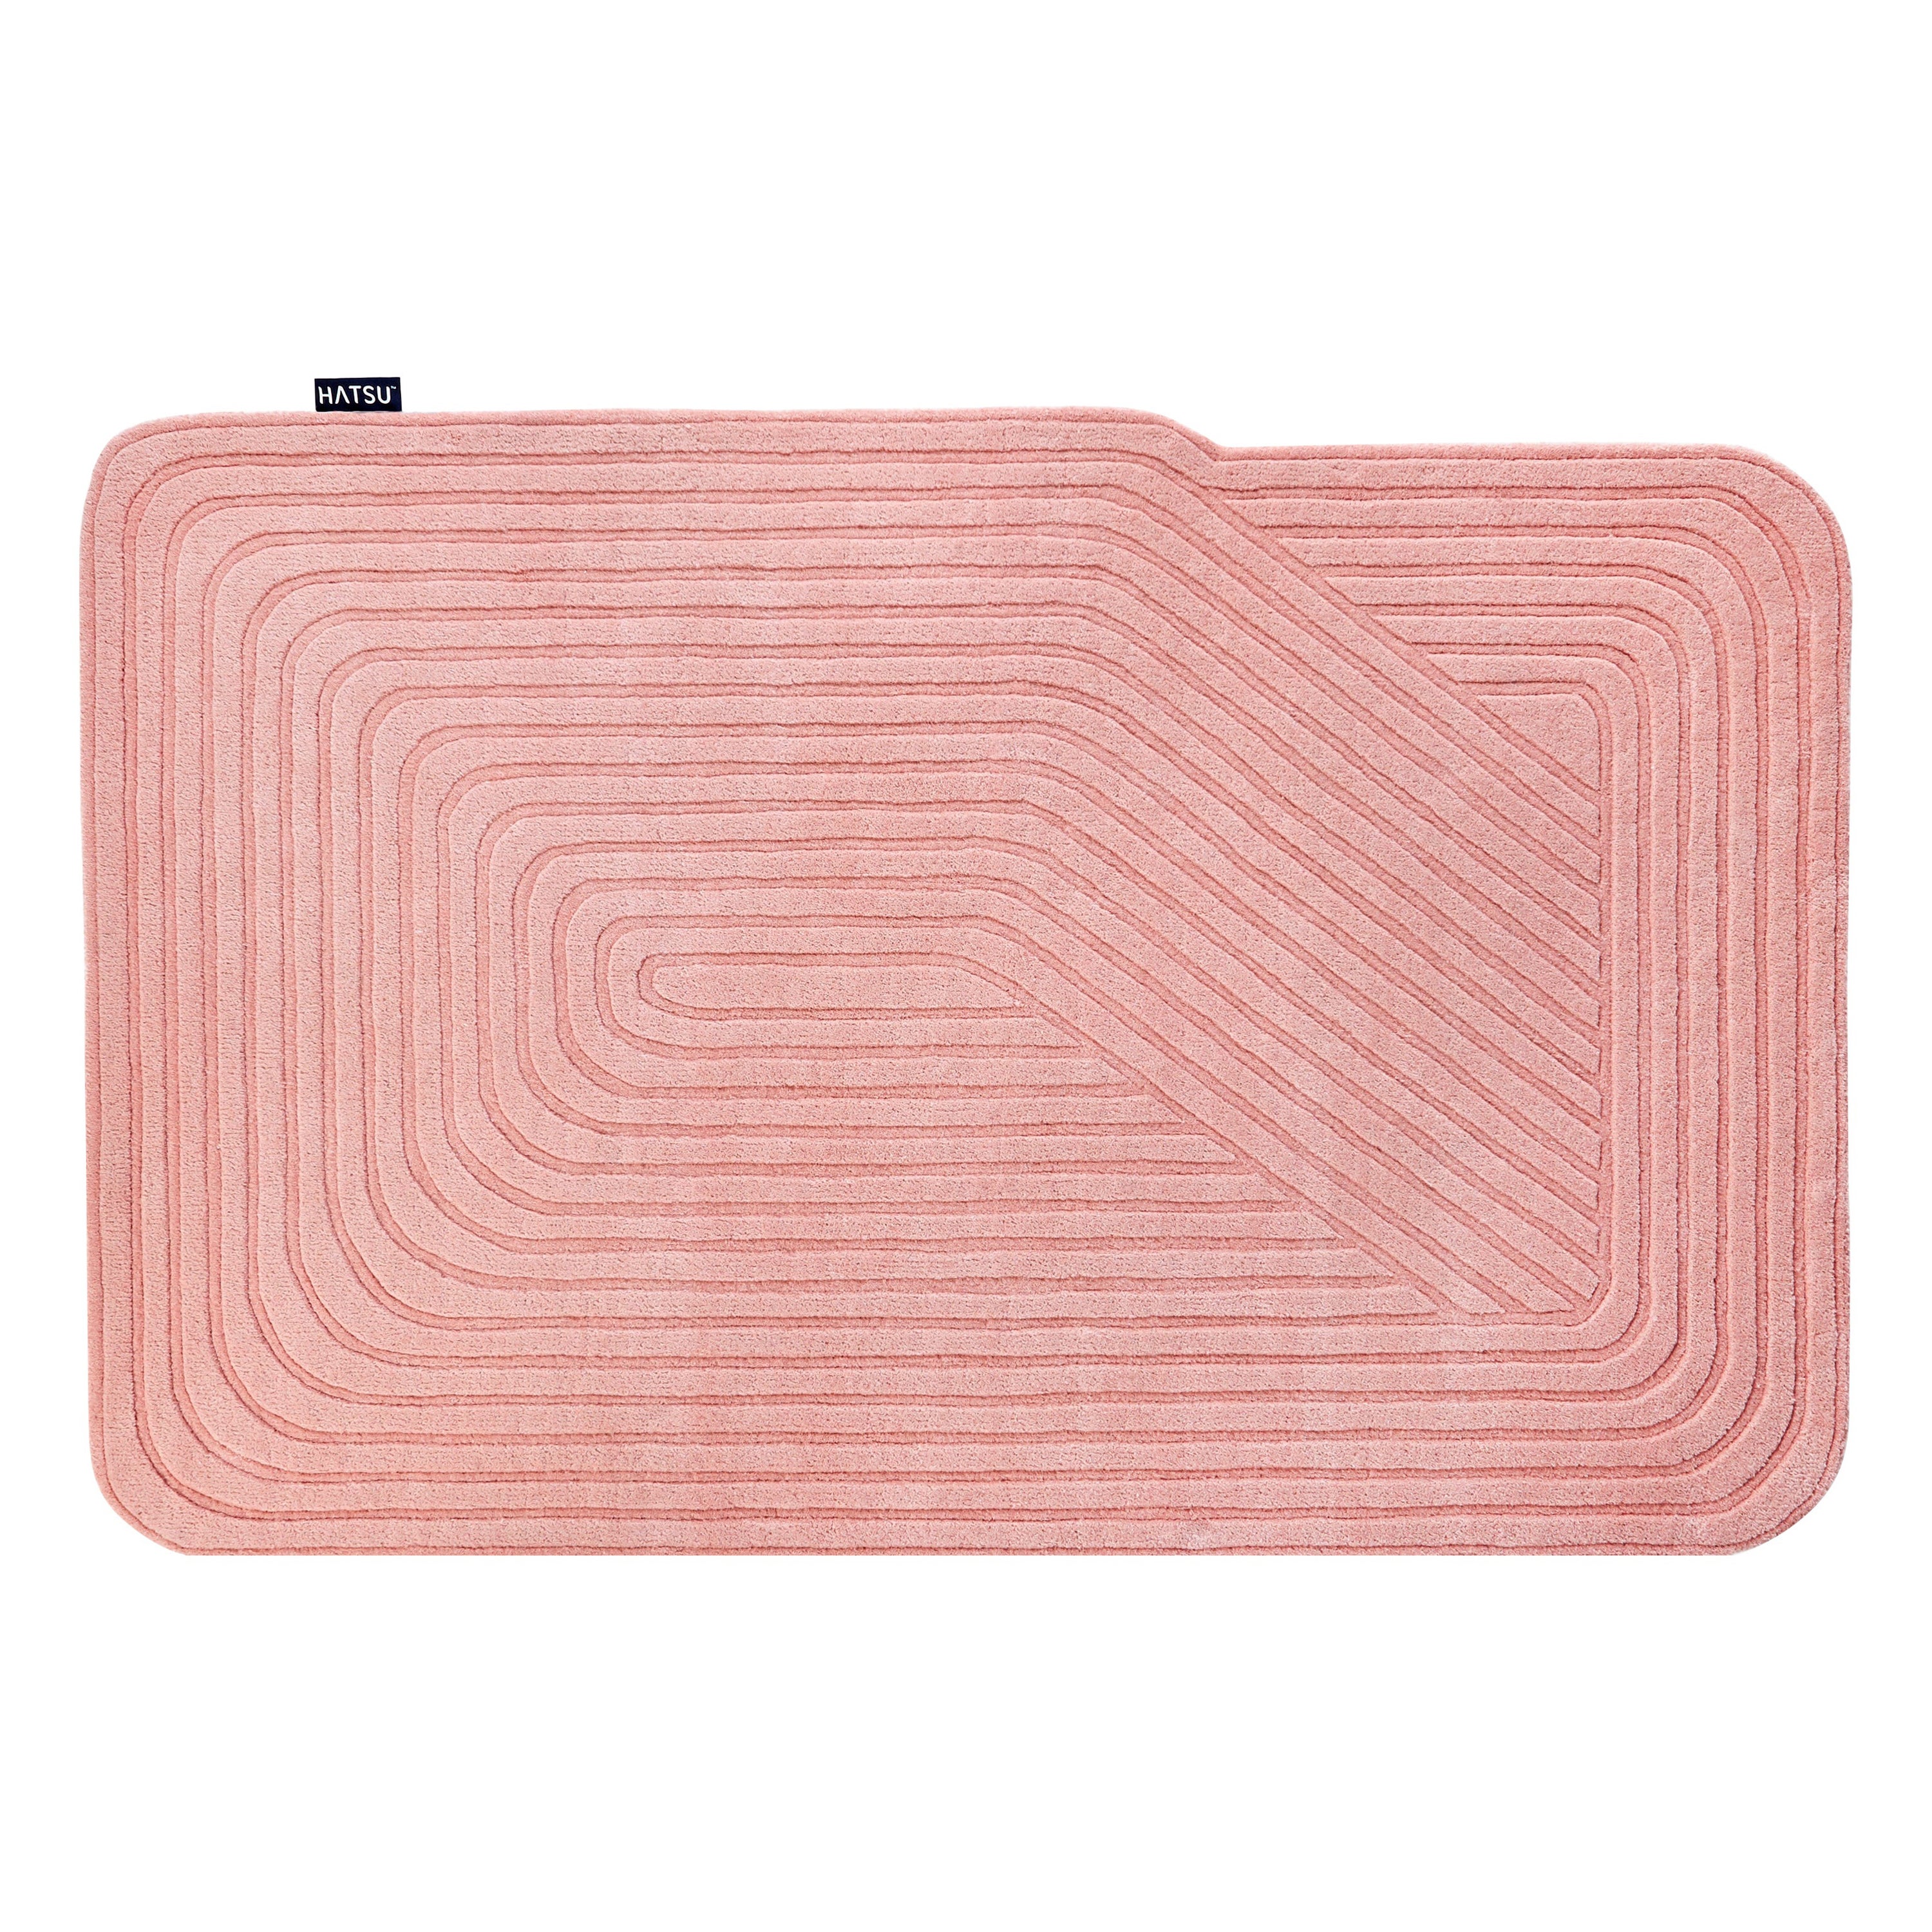 Hand Tufted Uneven Pink Rug by Hatsu